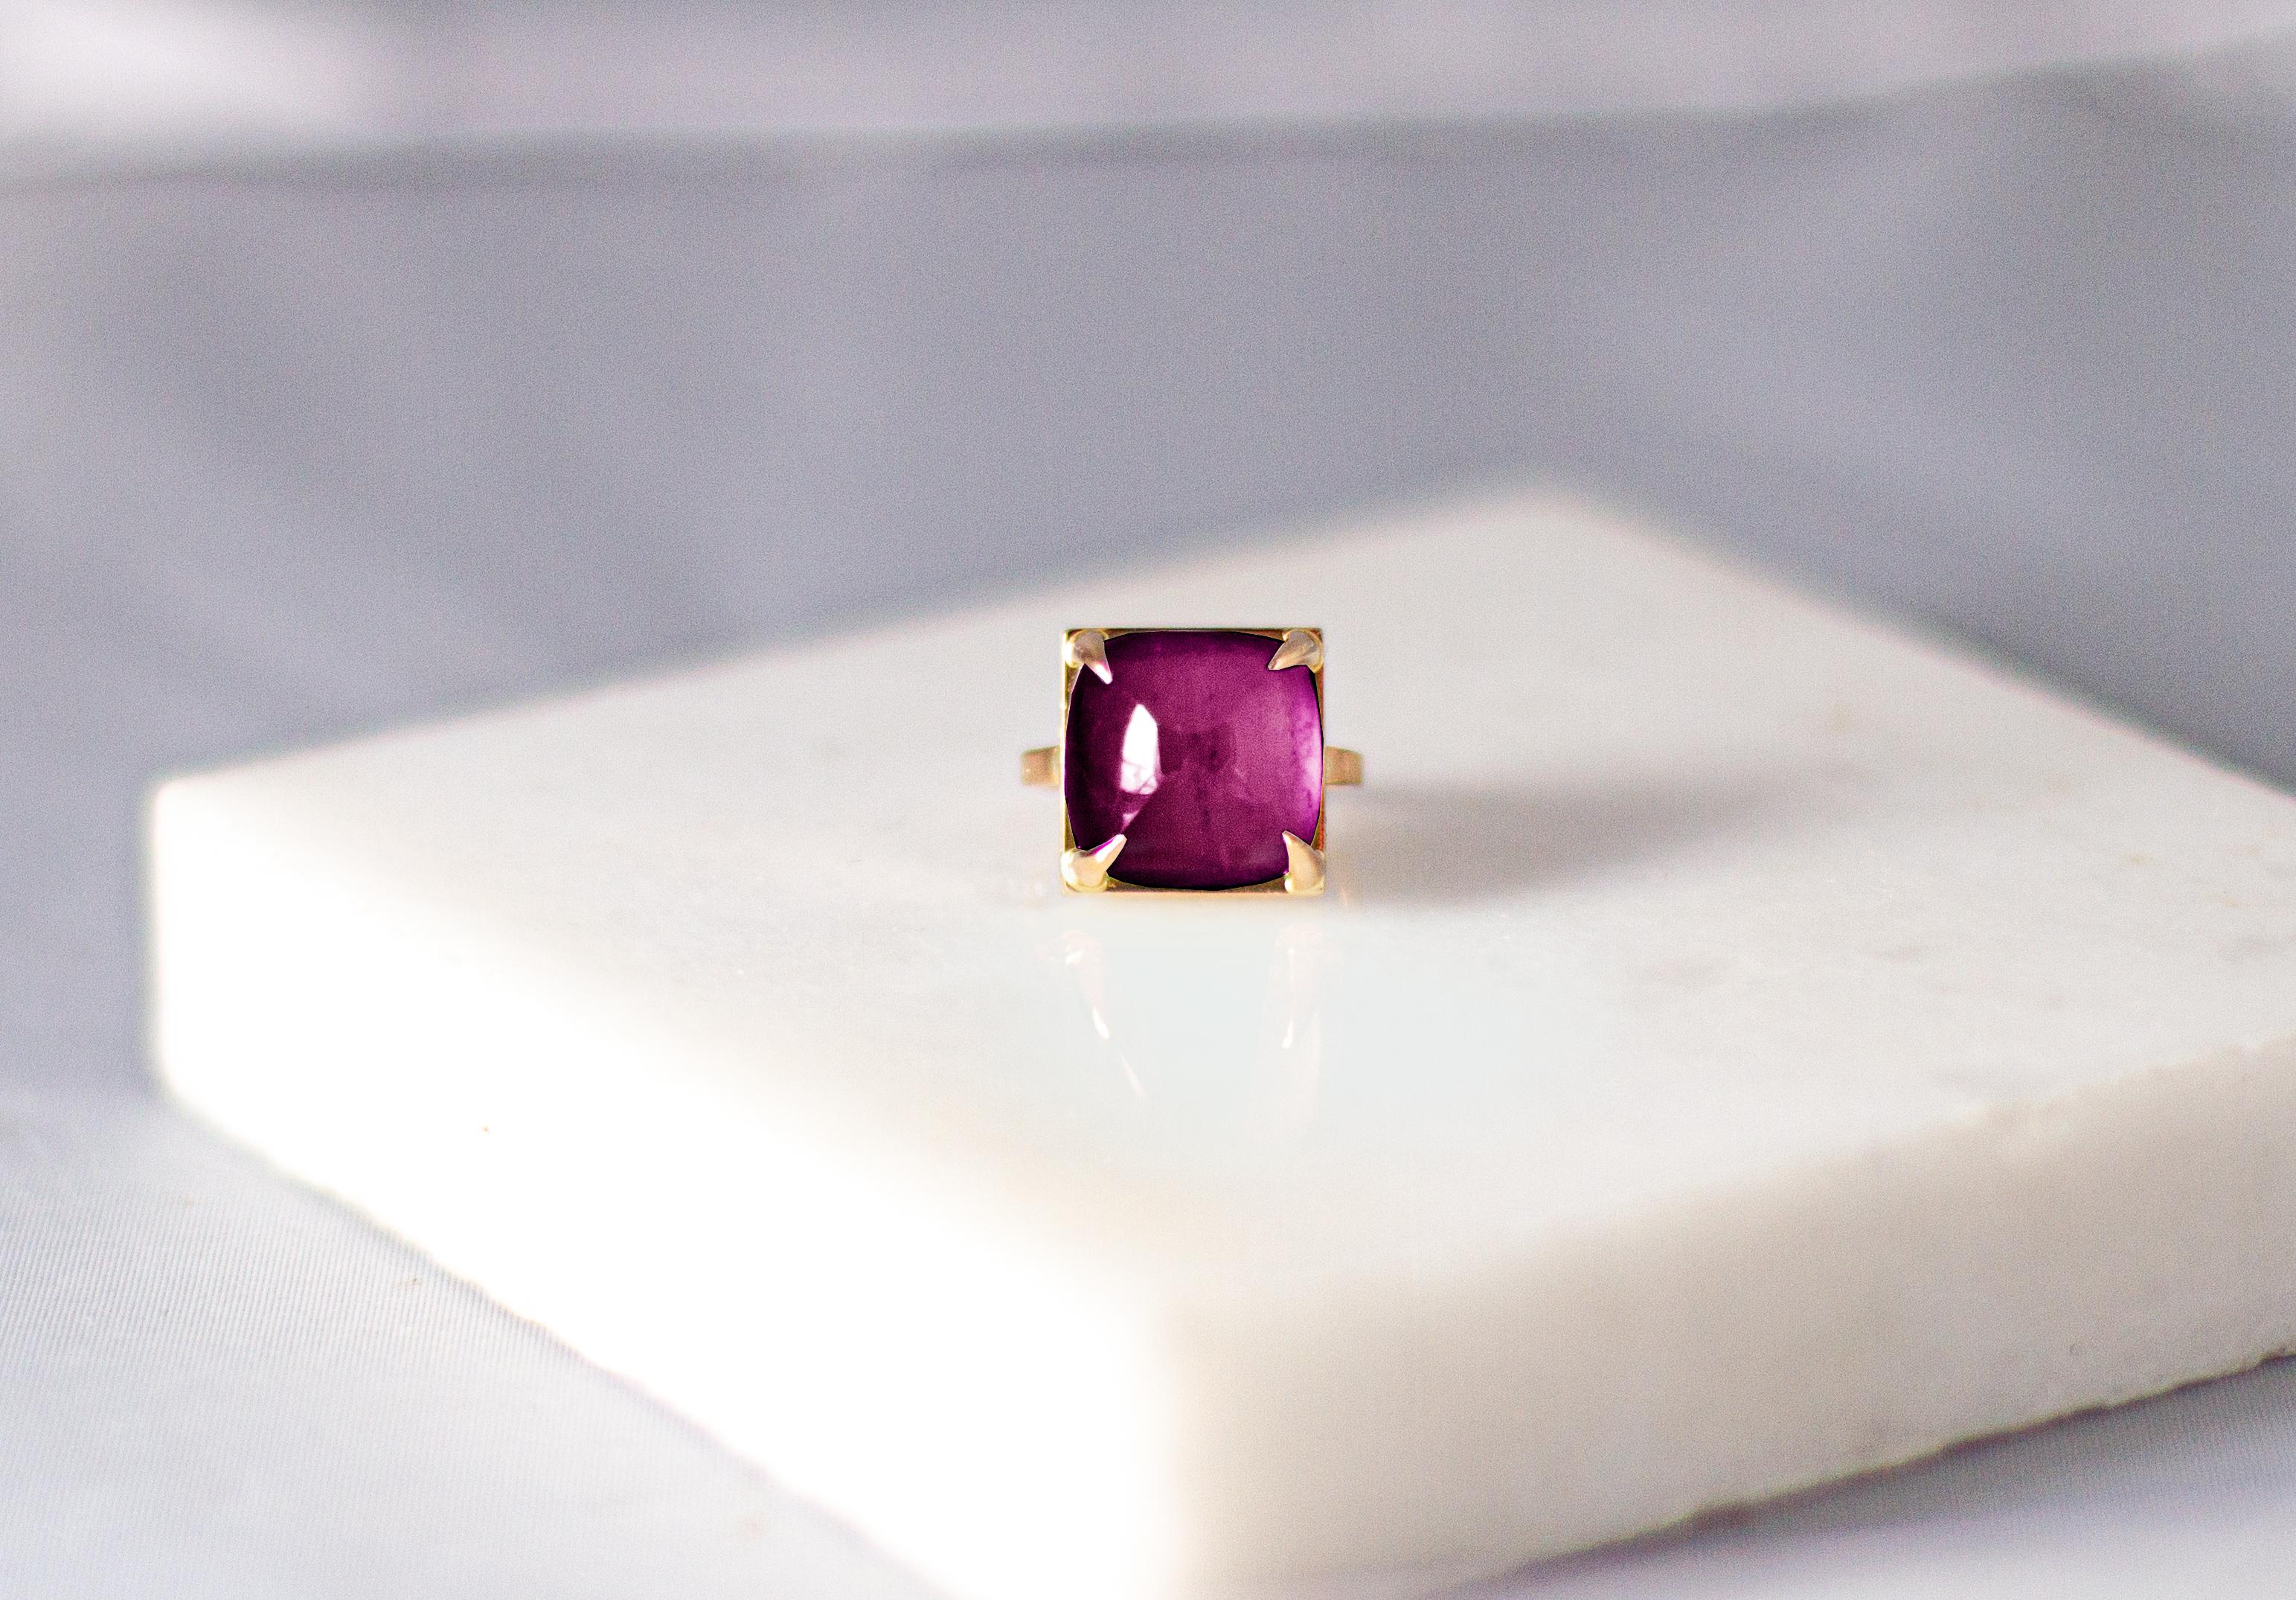 This Fashion ring is made of 18 karat yellow gold and sugarloaf natural pink tourmaline (19,29 carats, 14,7 mm/ 0,55 inches). This ring can be personally signed. 

When for most of the gem it works the way: the smaller prongs the better. This is the